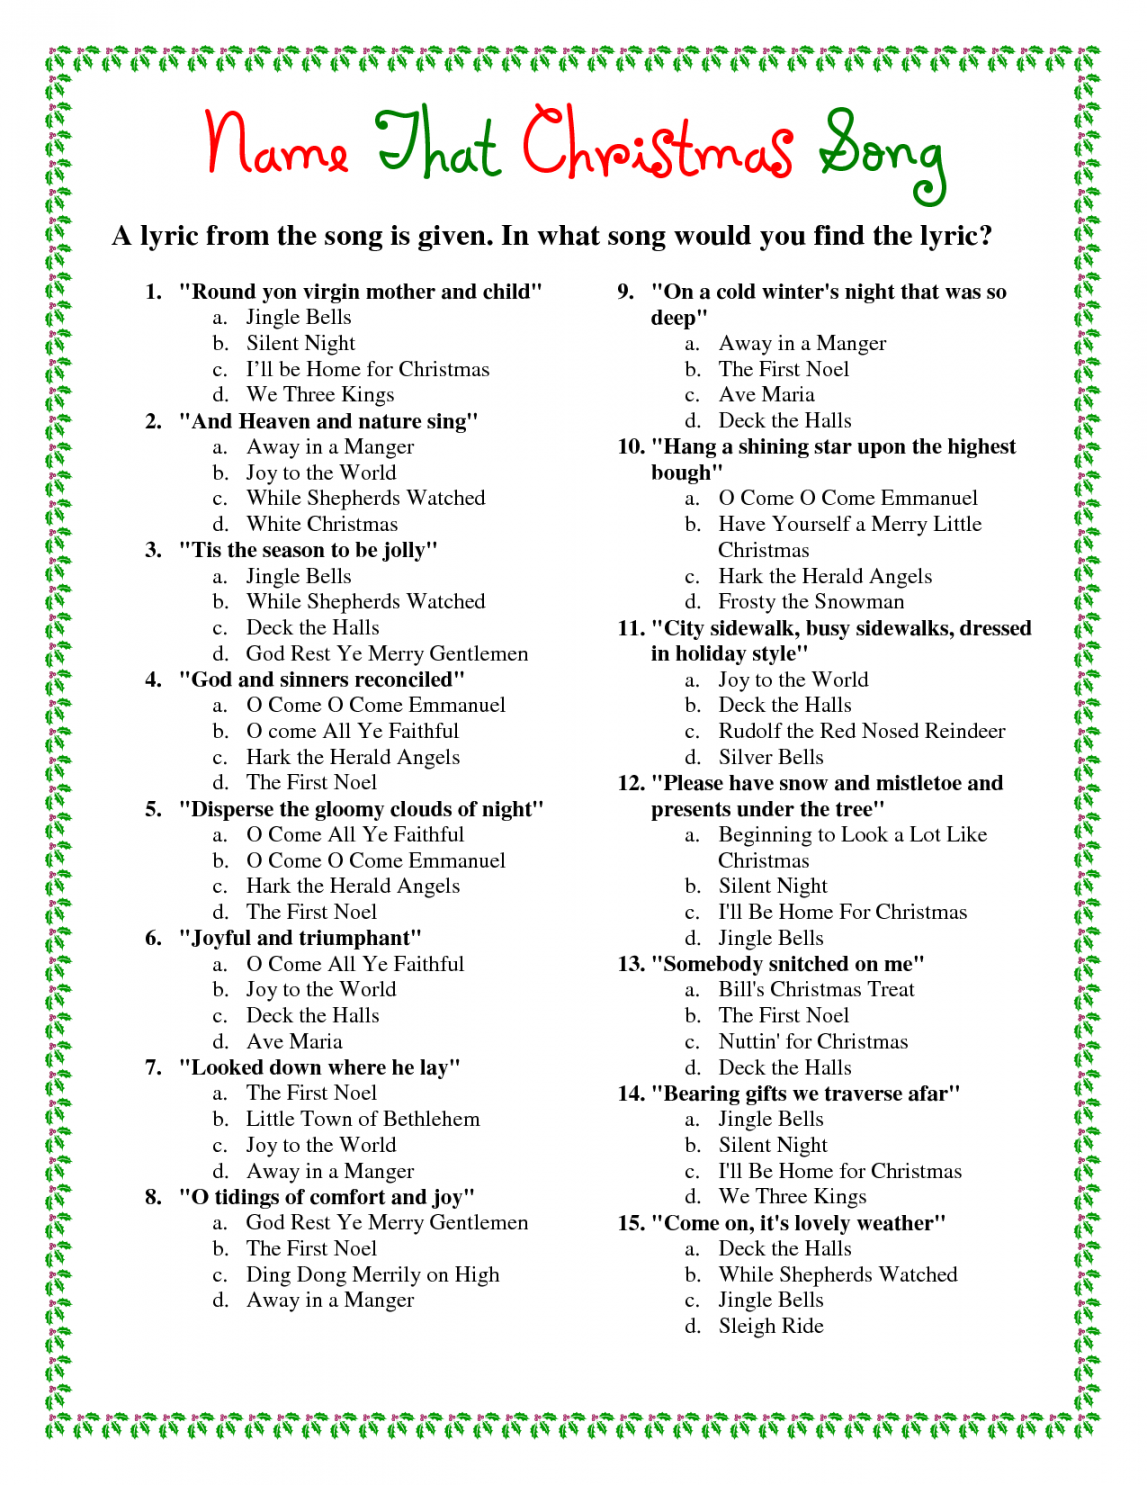 Best Free Printable Christmas Trivia Questions And Answers  - FREE Printables - Free Christmas Trivia Questions And Answers Printable